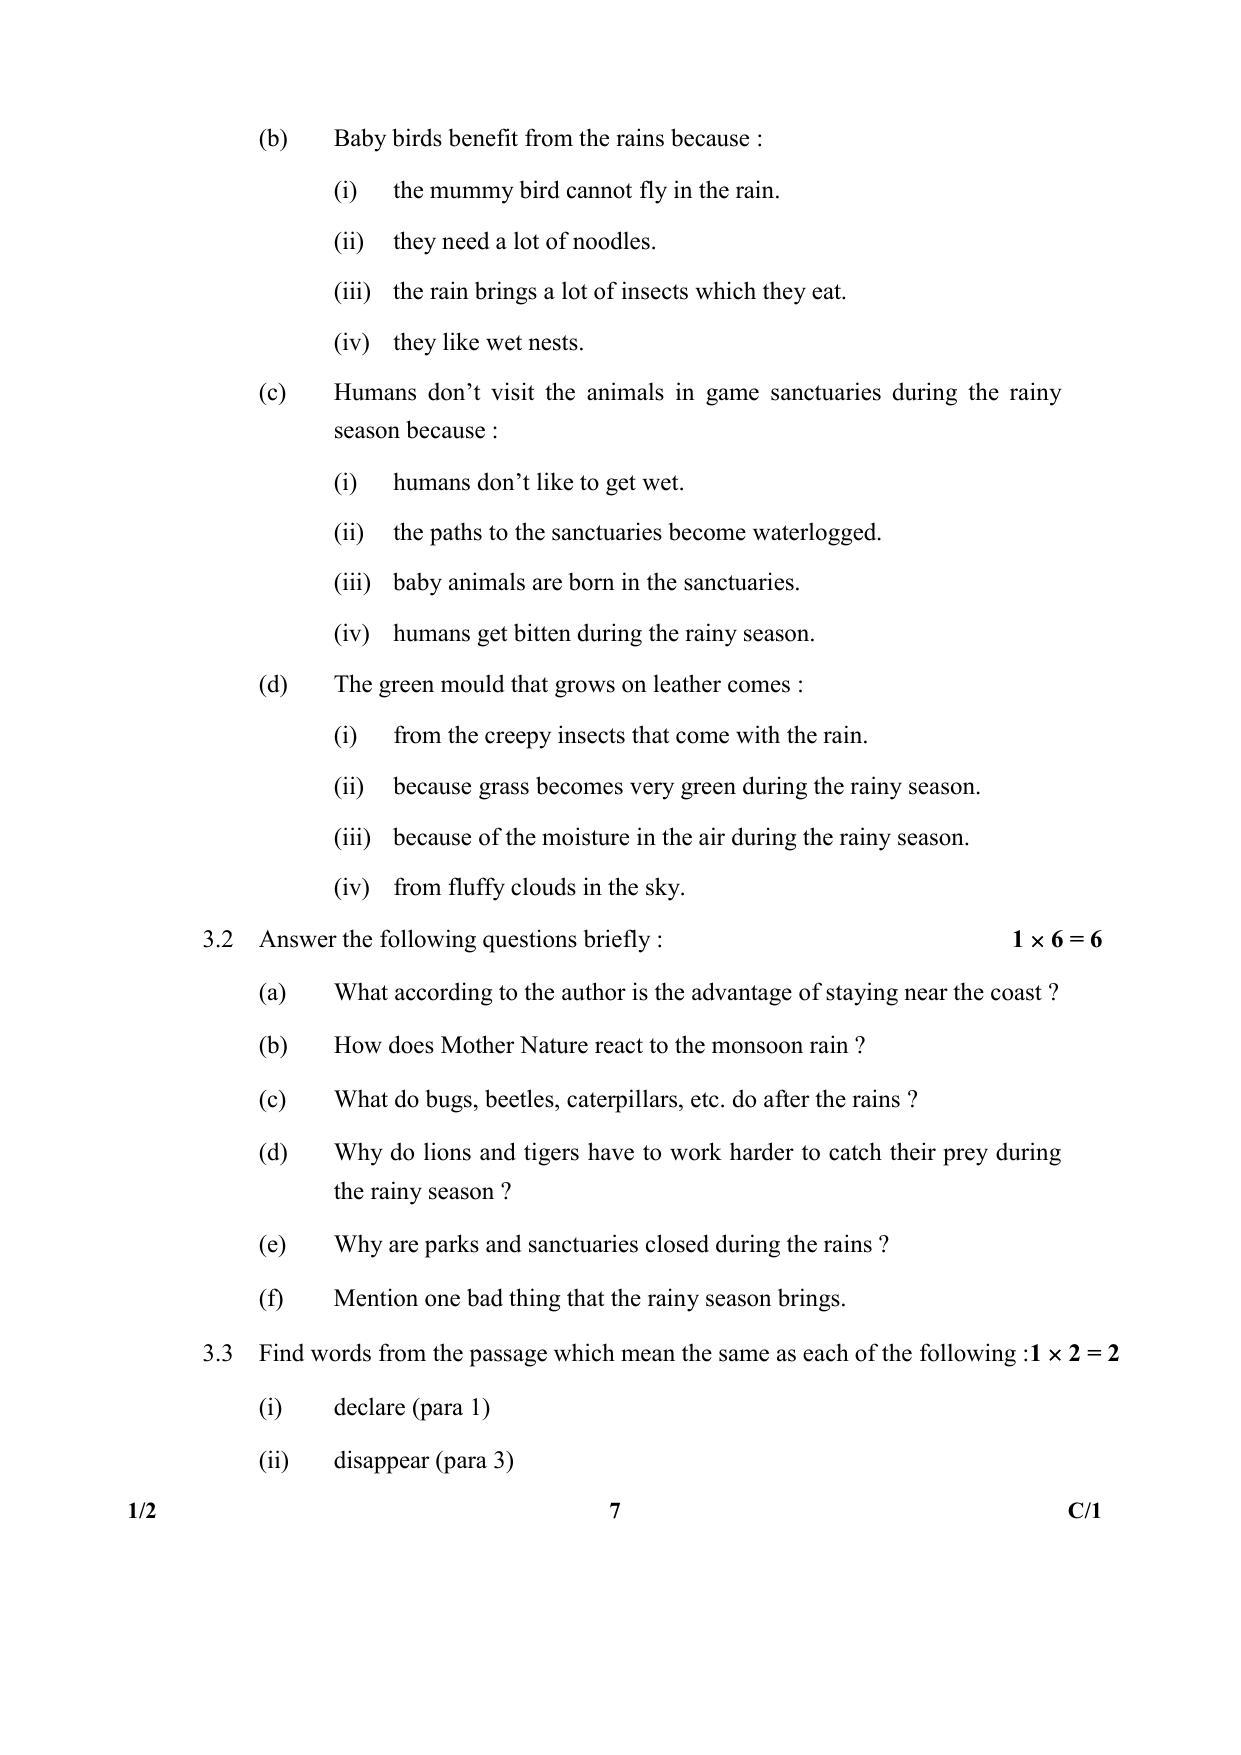 CBSE Class 12 1-2(English Core) 2018 Compartment Question Paper - Page 7